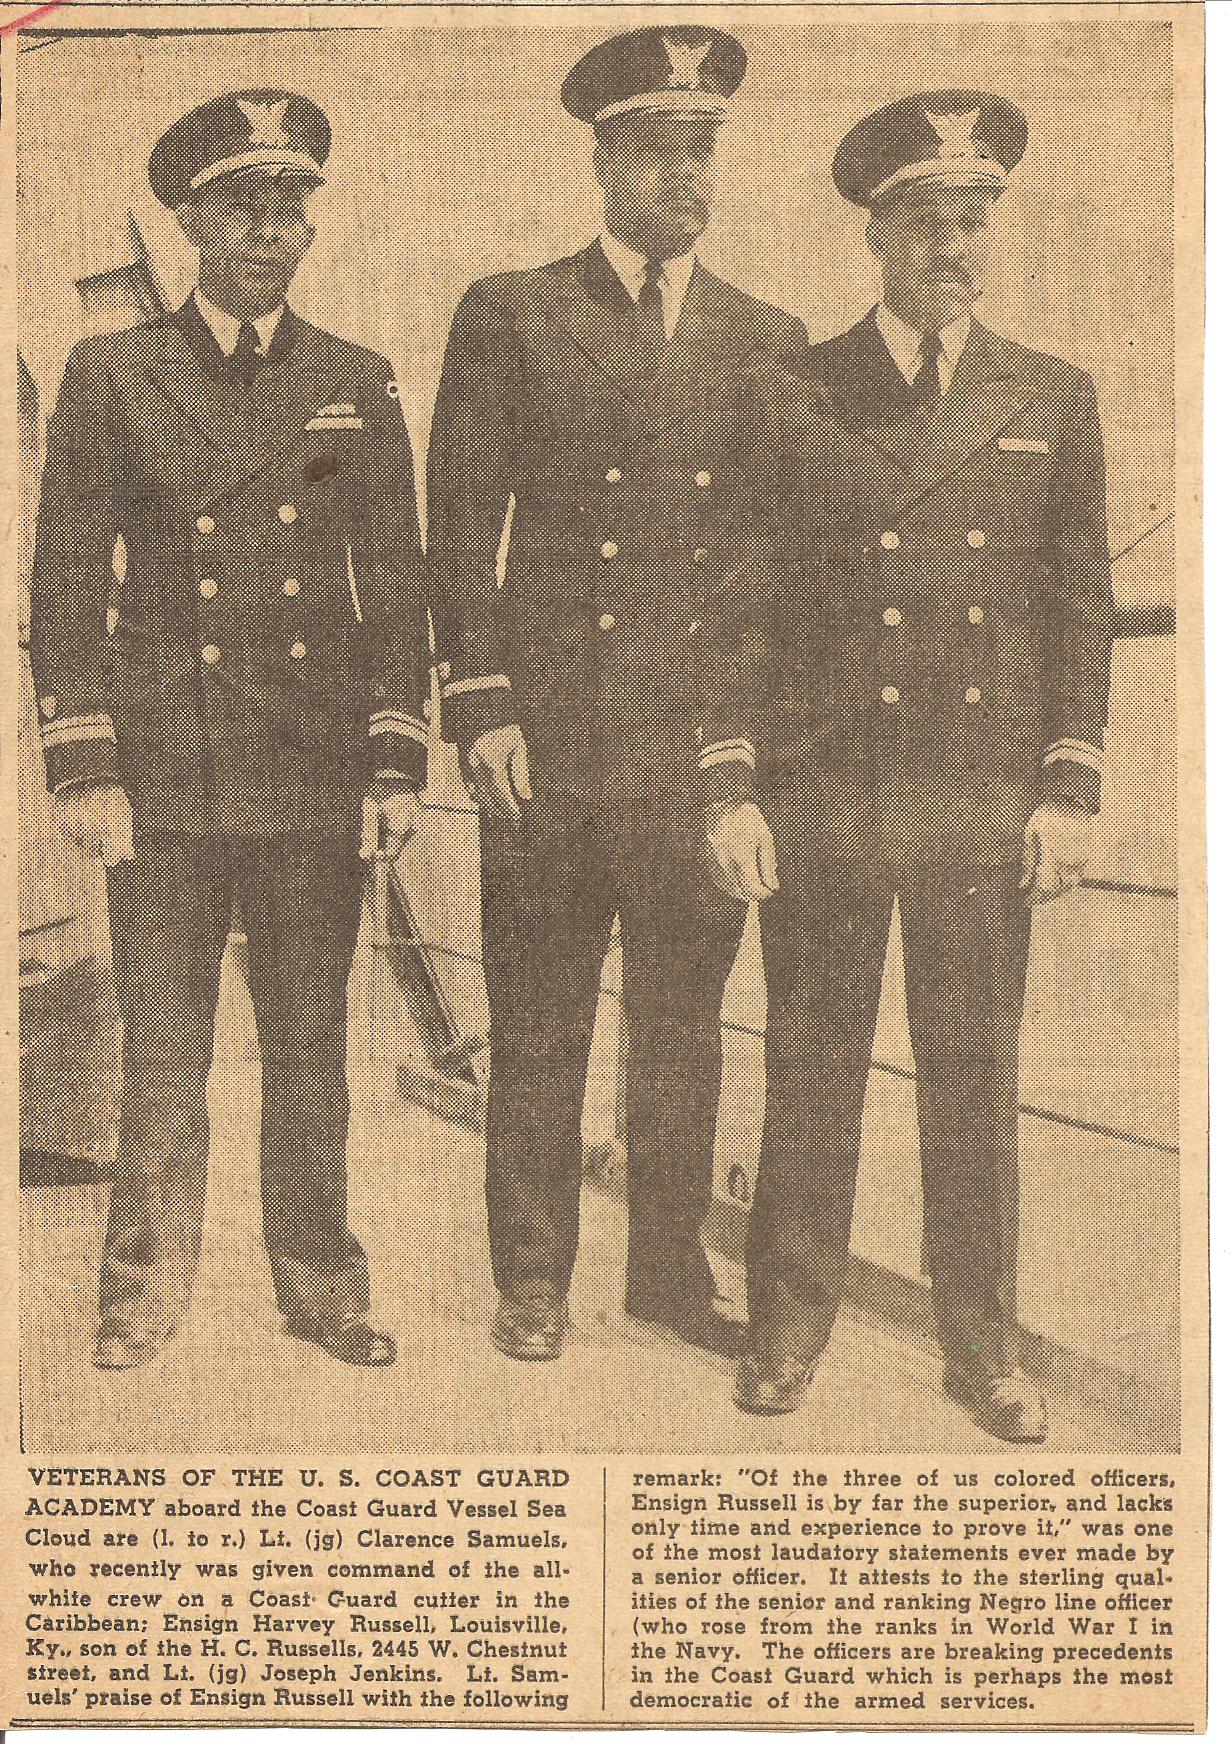 5.	Newspaper image of Sea Cloud’s African American officers. They include from left to right, direct commission from enlisted officer Clarence Samuels, and ROTC officers Harvey Russell and Joseph Jenkins. (Courtesy of the Harvey Russell Family)